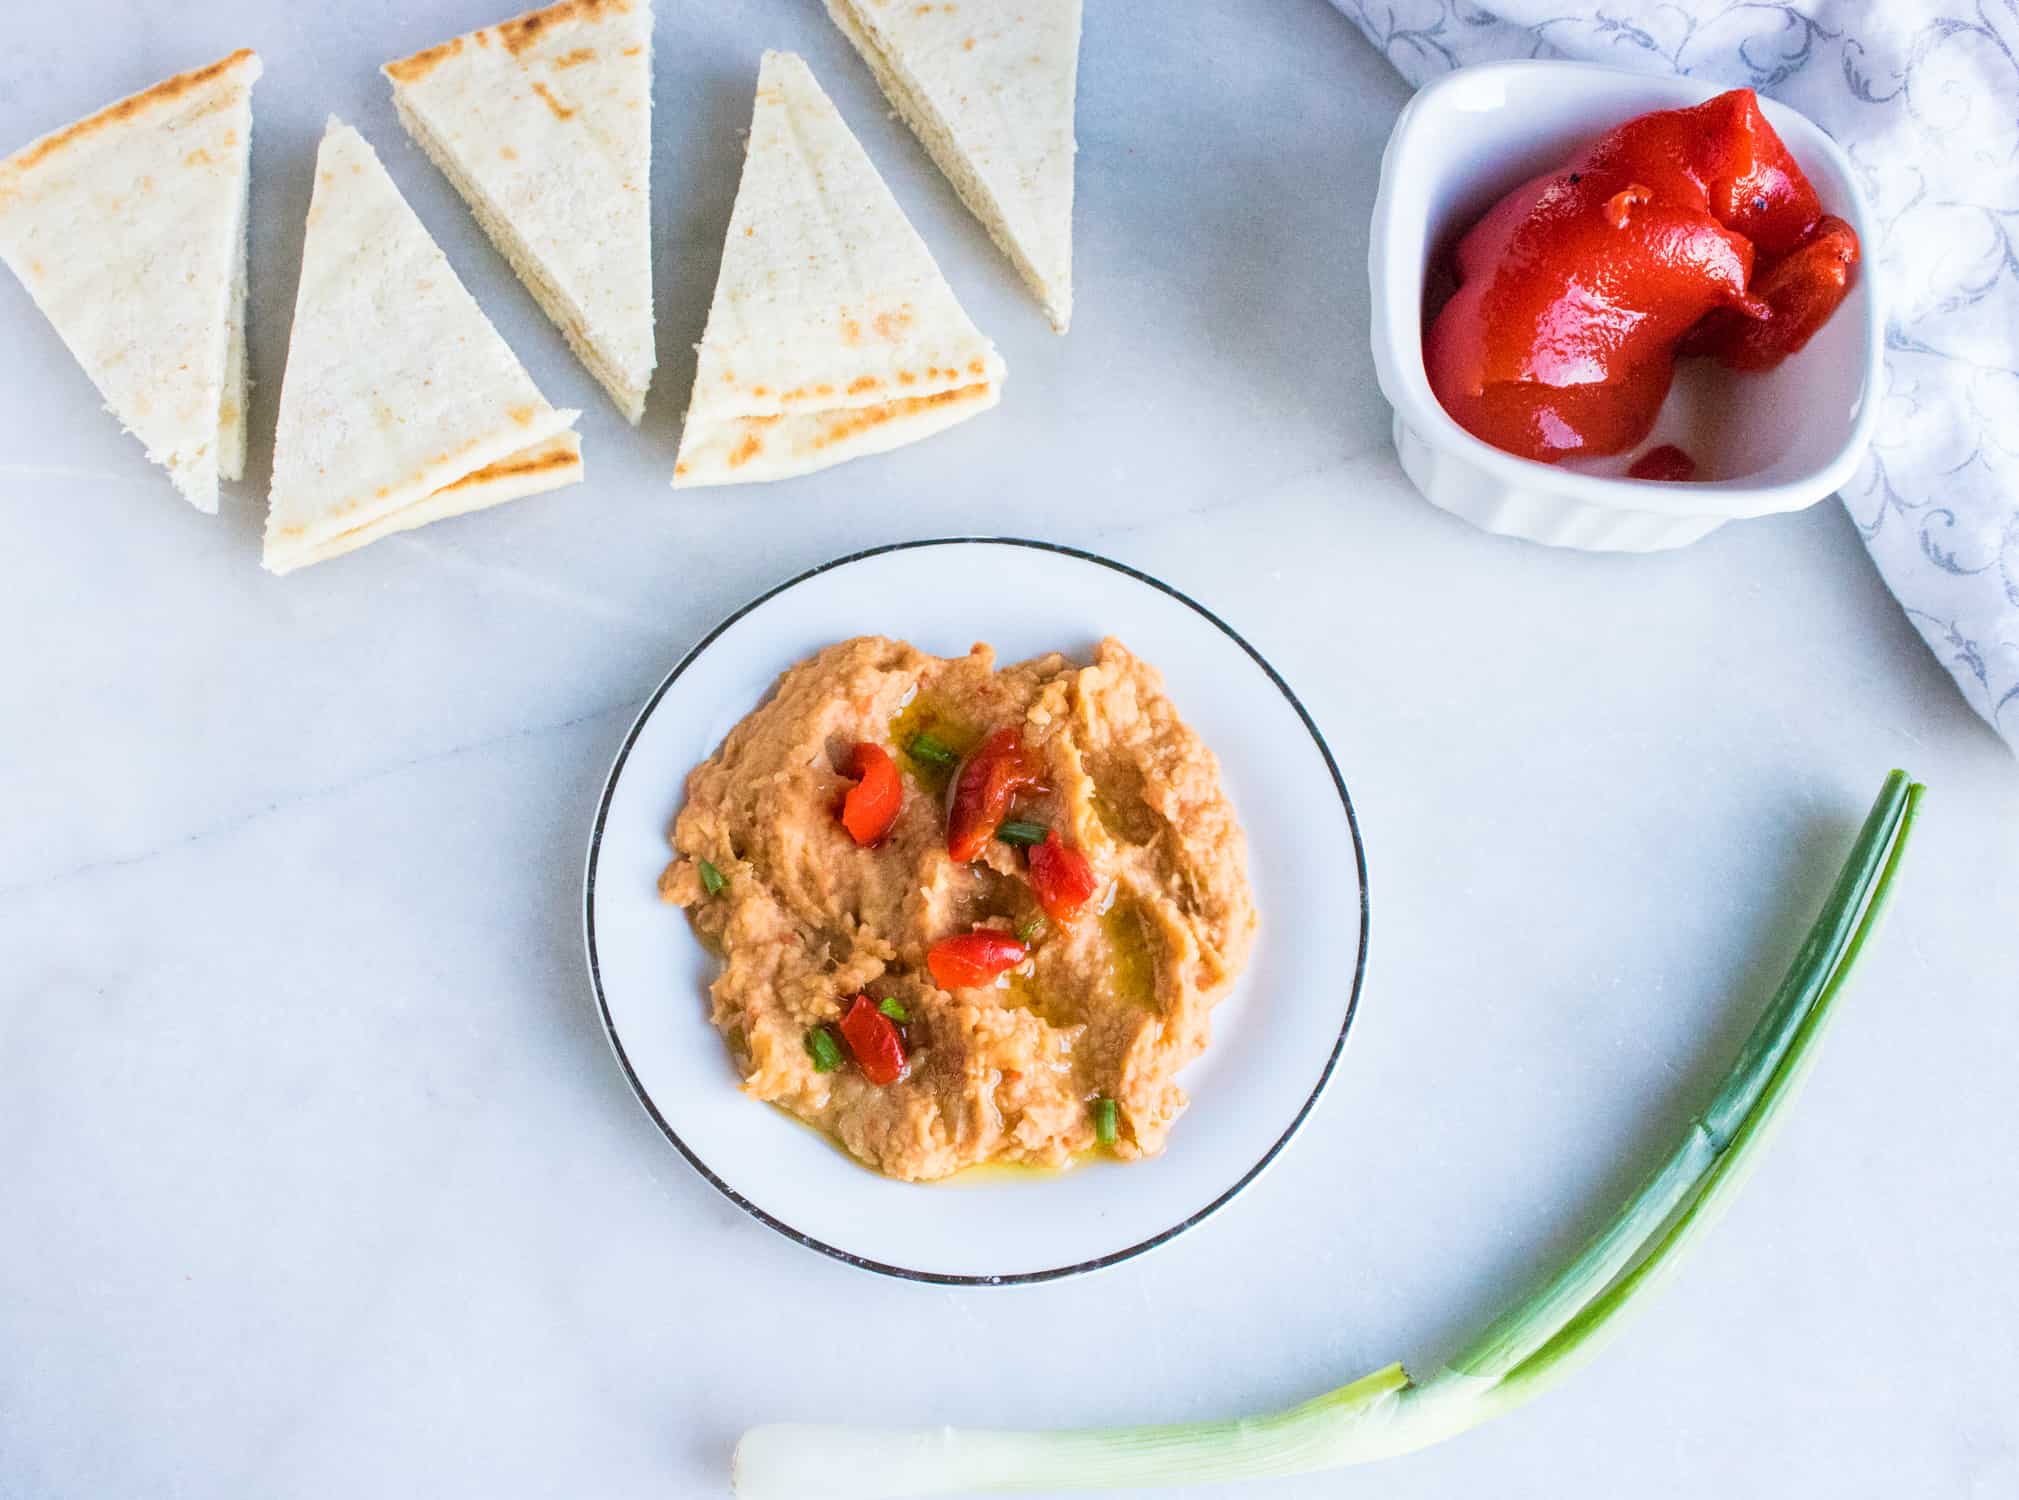 sliced triangles of pita bread in background with white bowl in foreground with Roasted Red Pepper Hummus in it with white ceramic dish with whole roasted red pepper in it and green onion laying in front